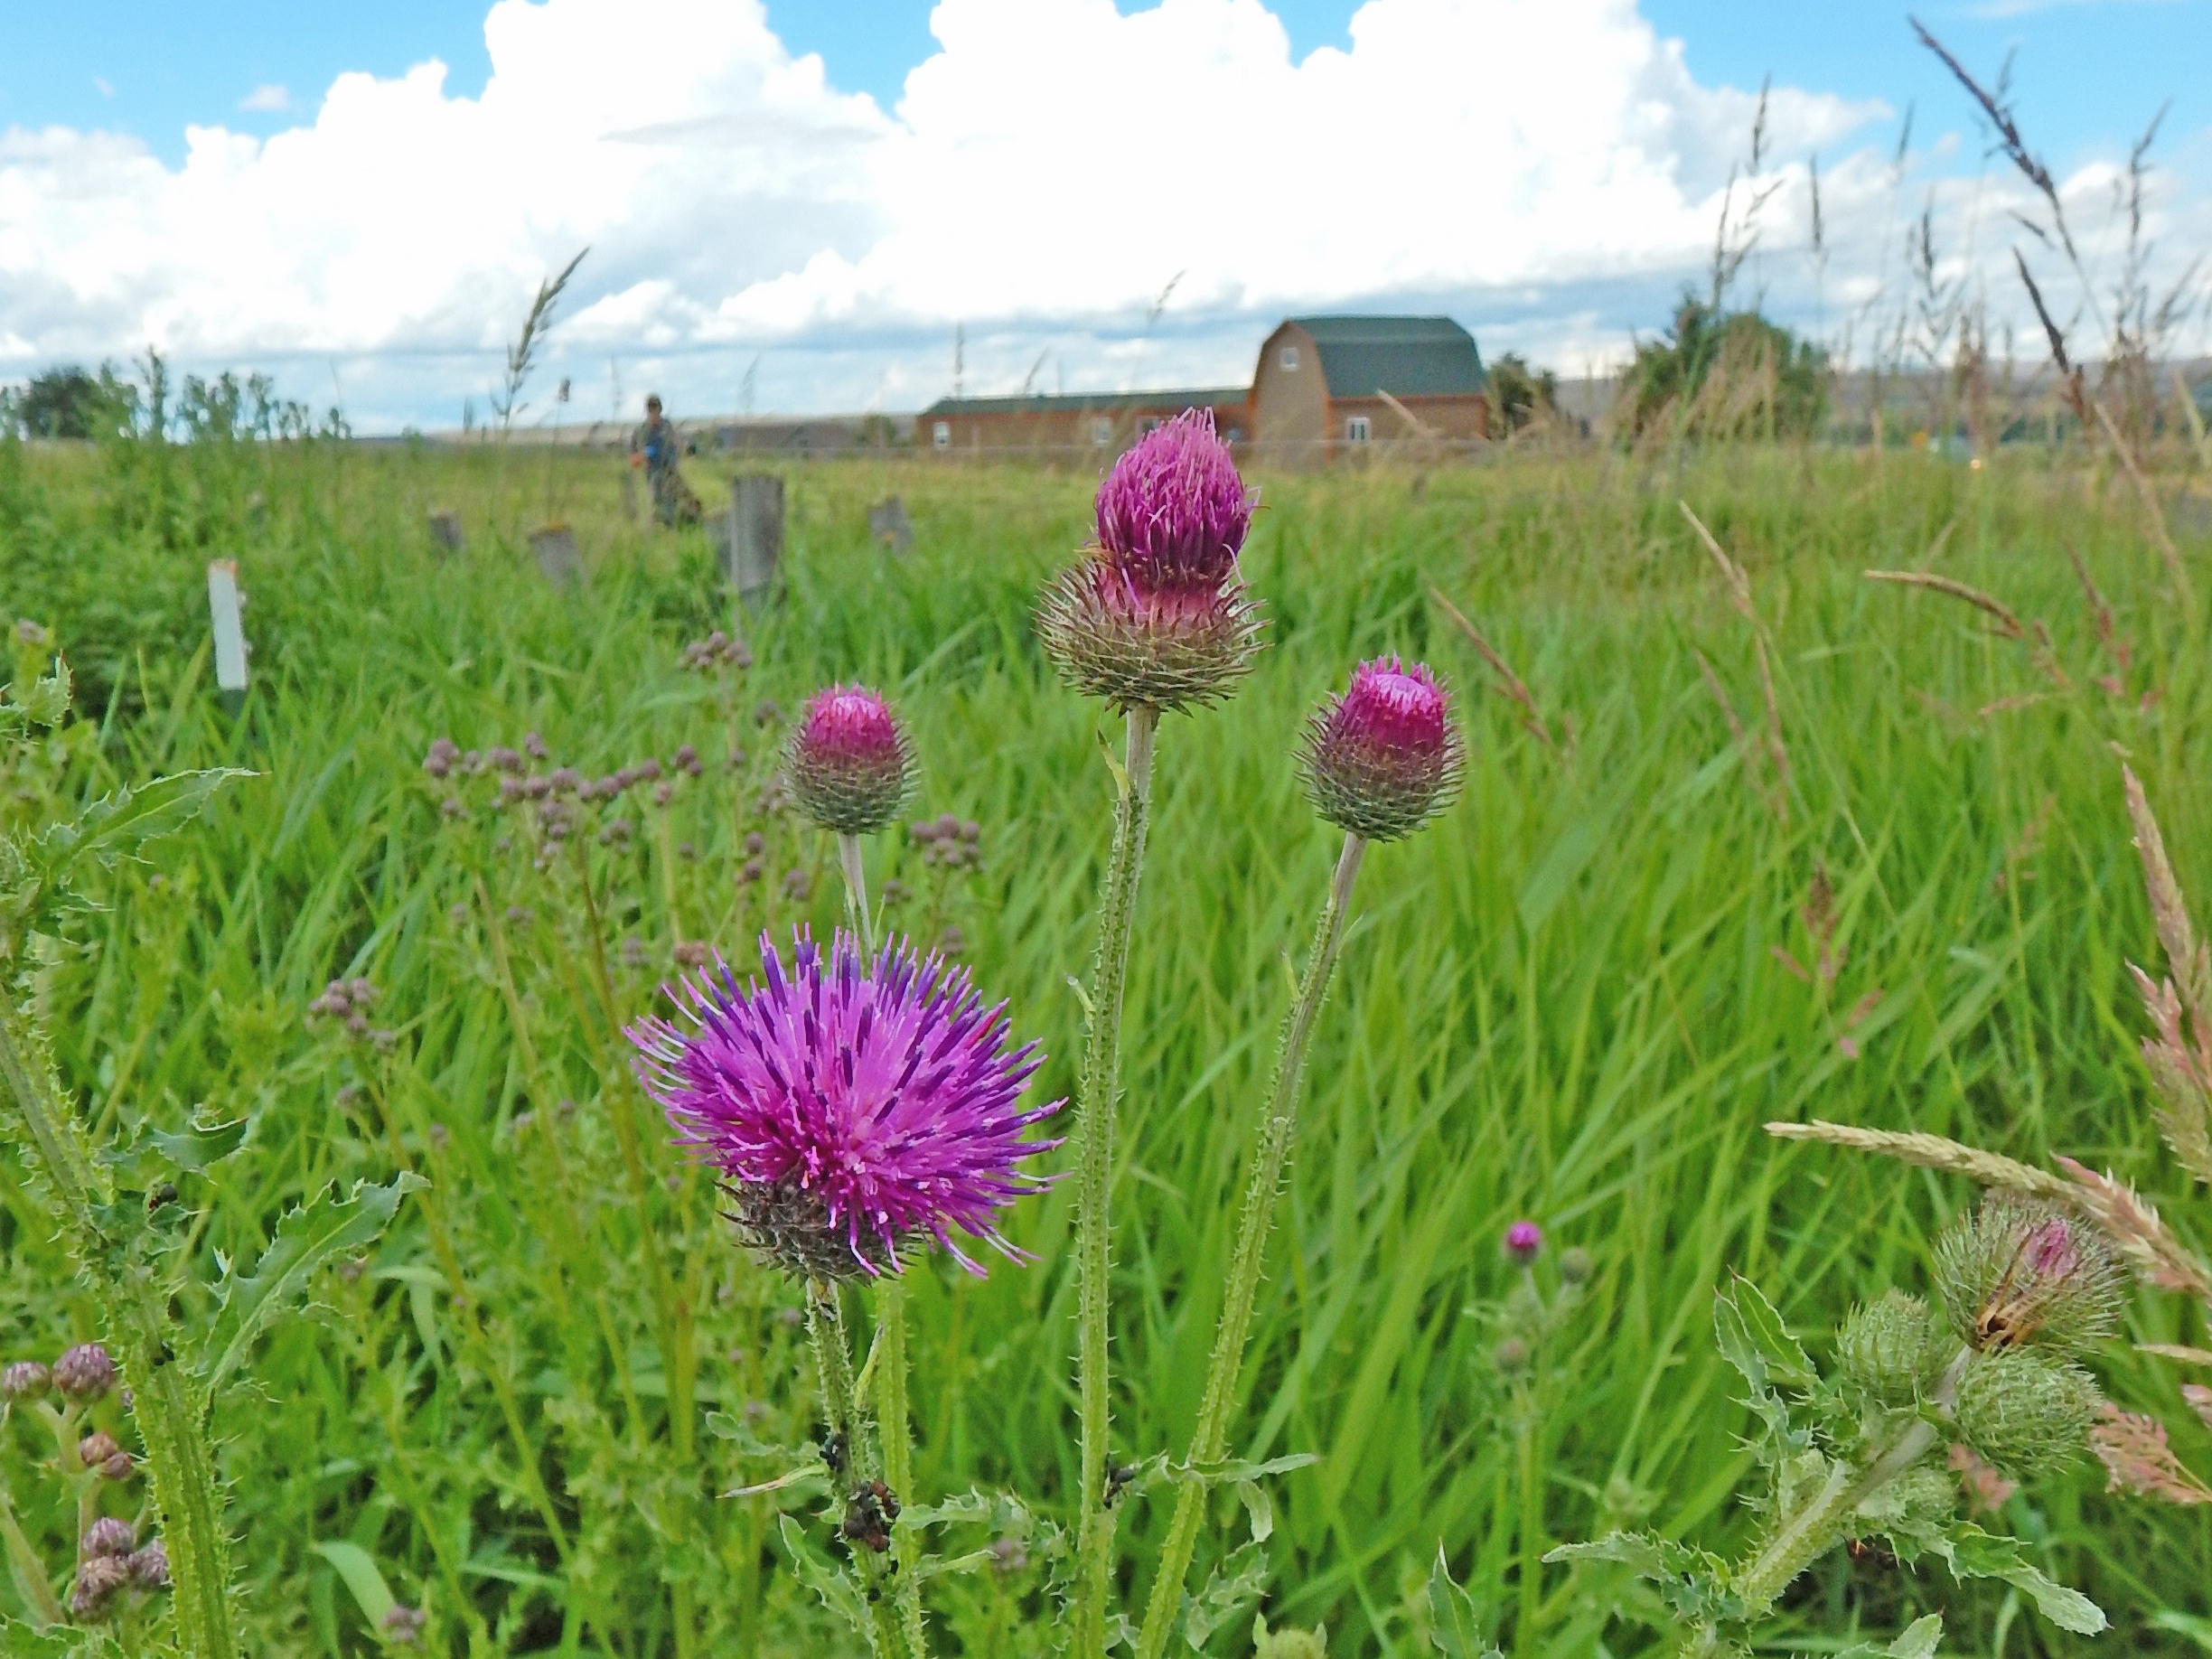 Welted thistle noxious weed growing in a field.